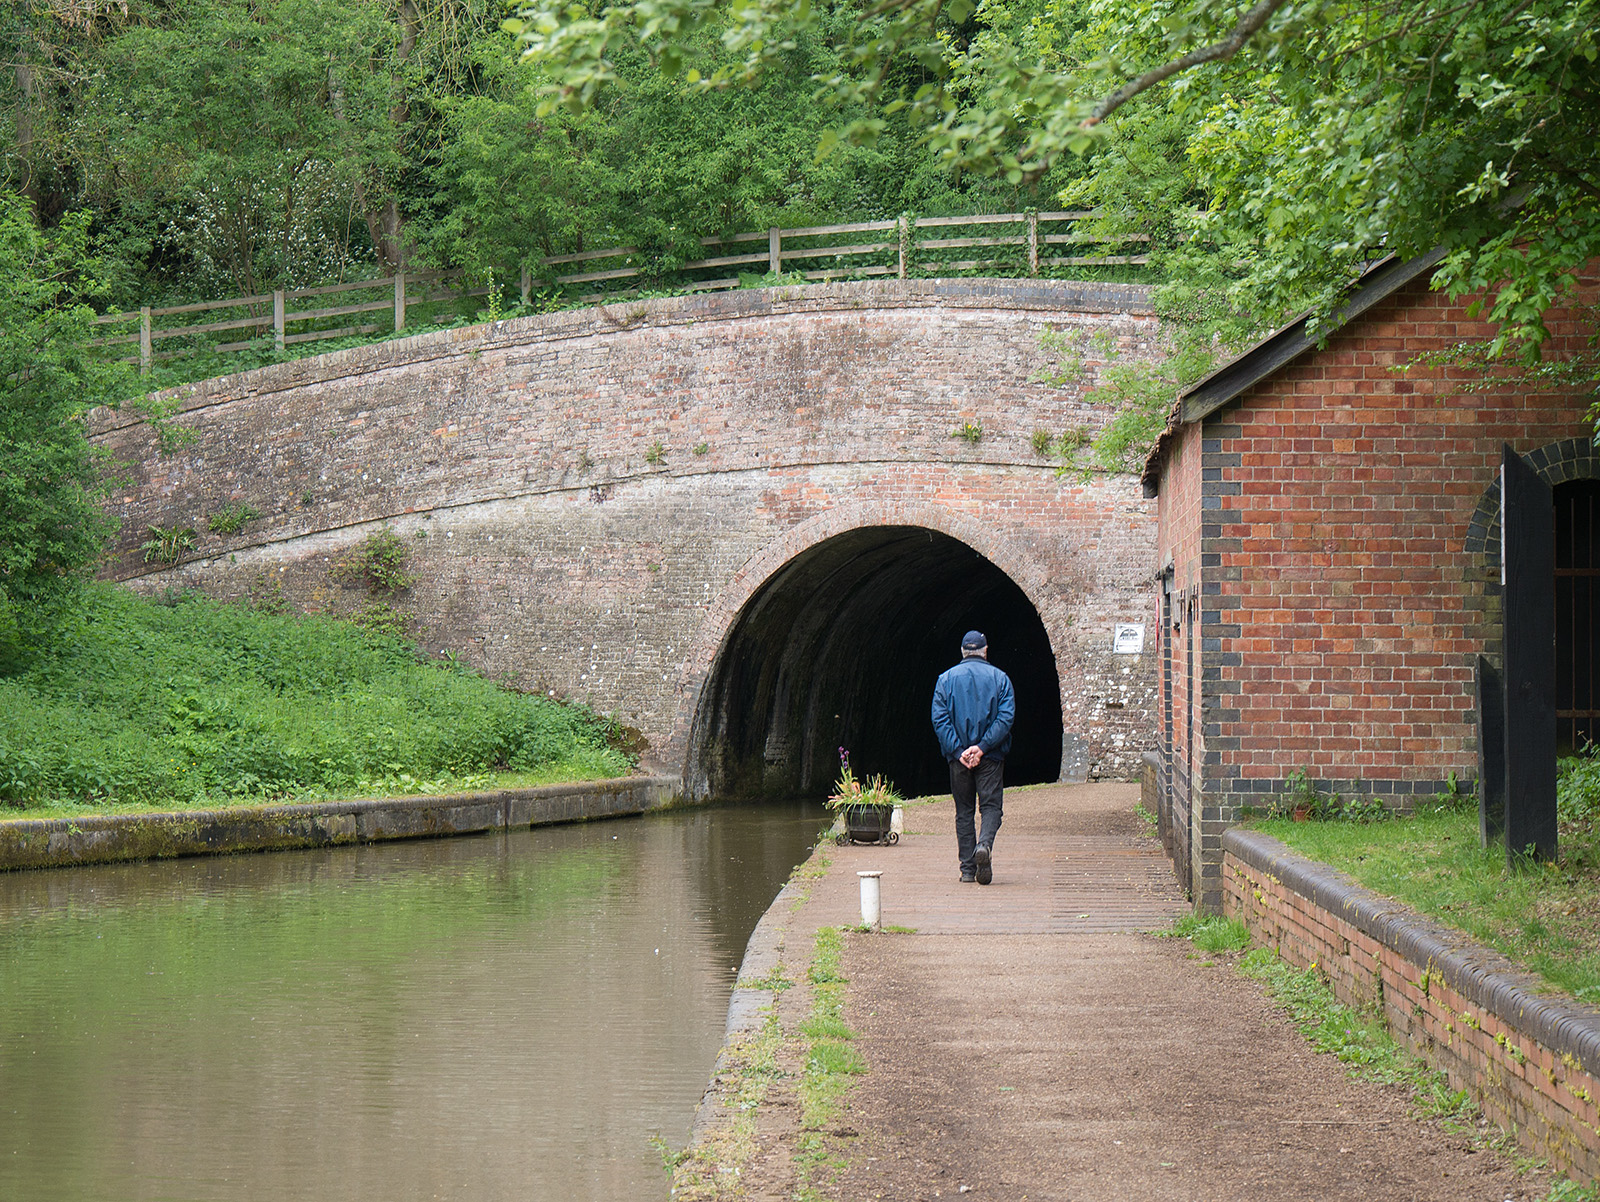 Approaching the southern entrance to Blisworth tunnel, the canal path rises up to the right